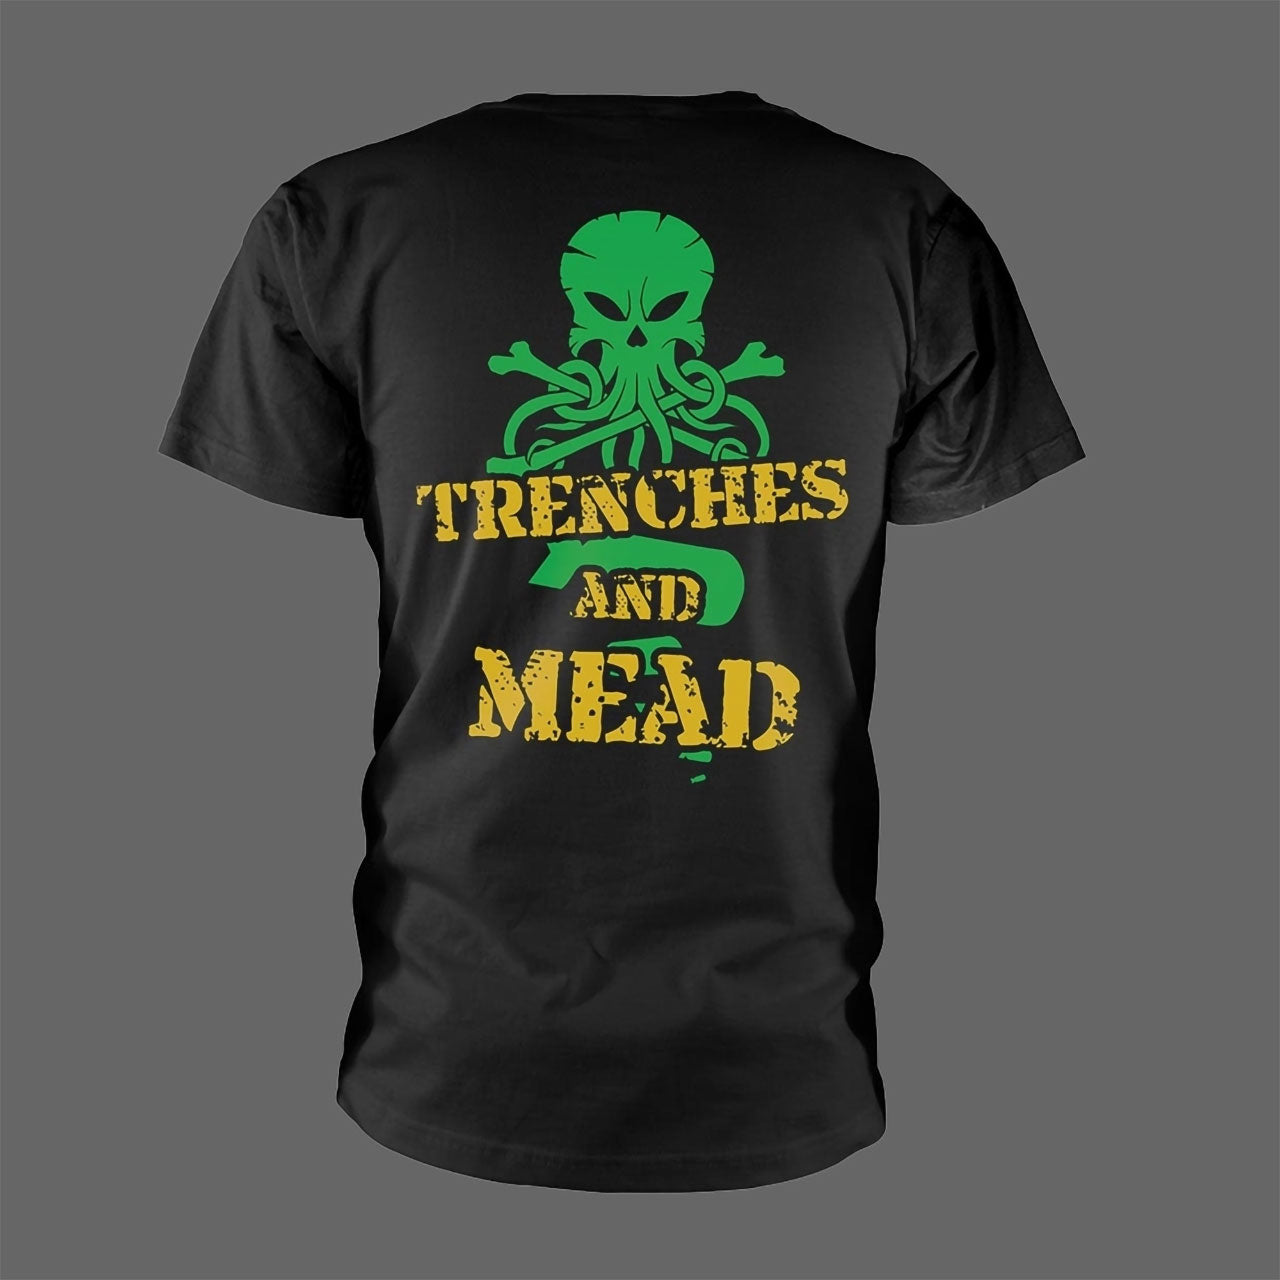 Alestorm - Trenches and Mead (T-Shirt)